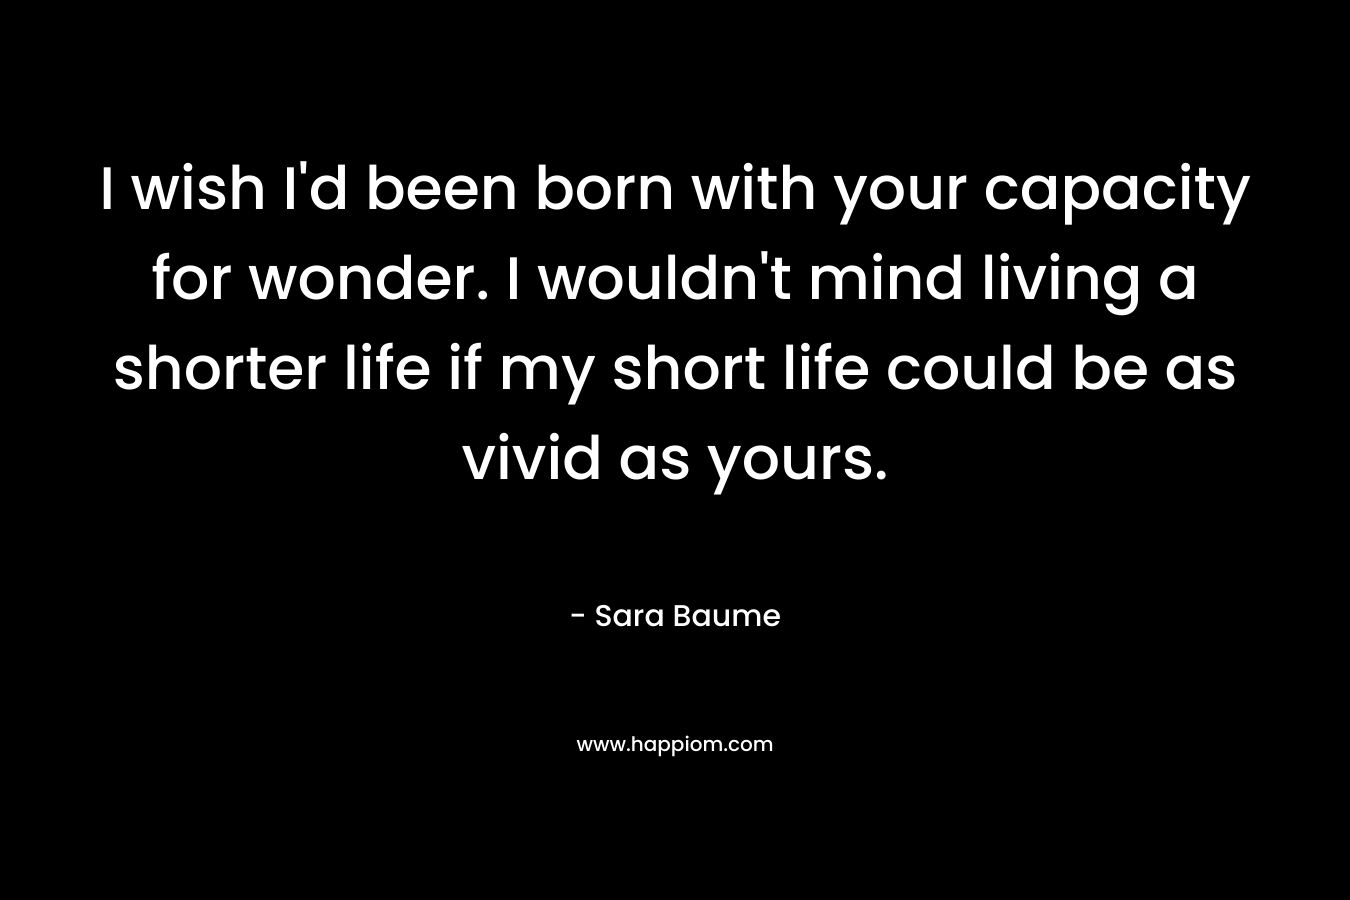 I wish I’d been born with your capacity for wonder. I wouldn’t mind living a shorter life if my short life could be as vivid as yours. – Sara Baume